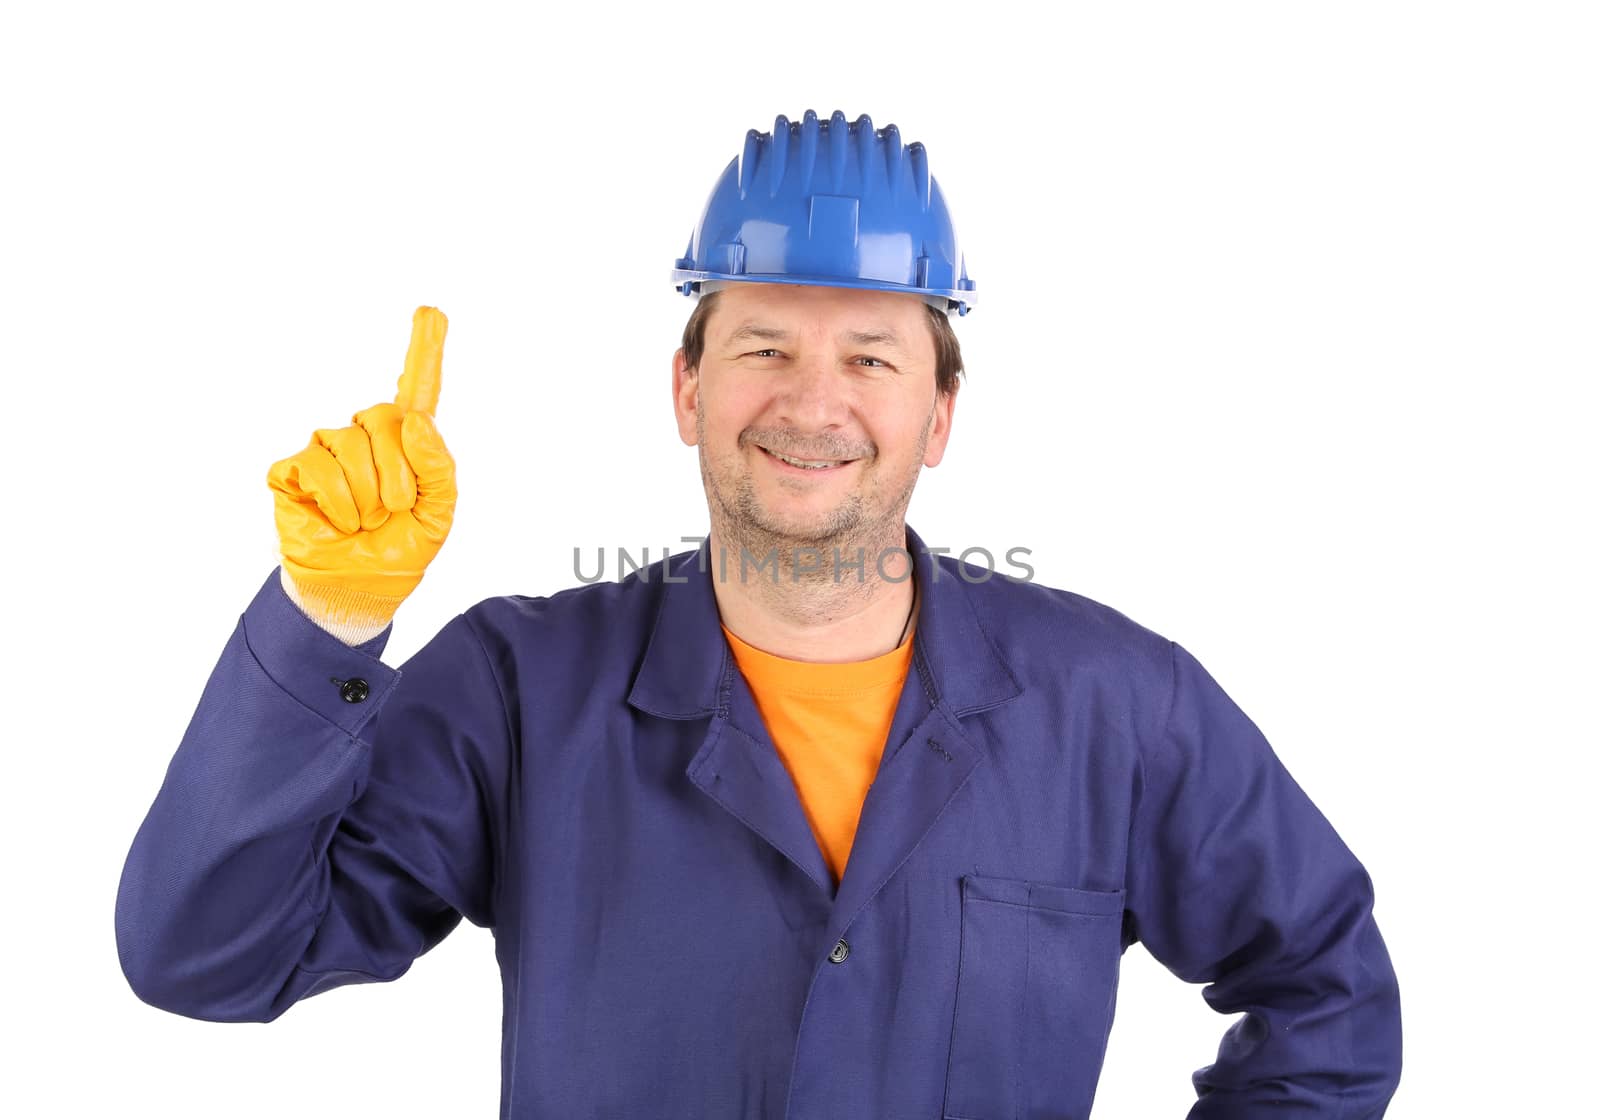 Worker shows hand attracting attention. Isolated on a white background.